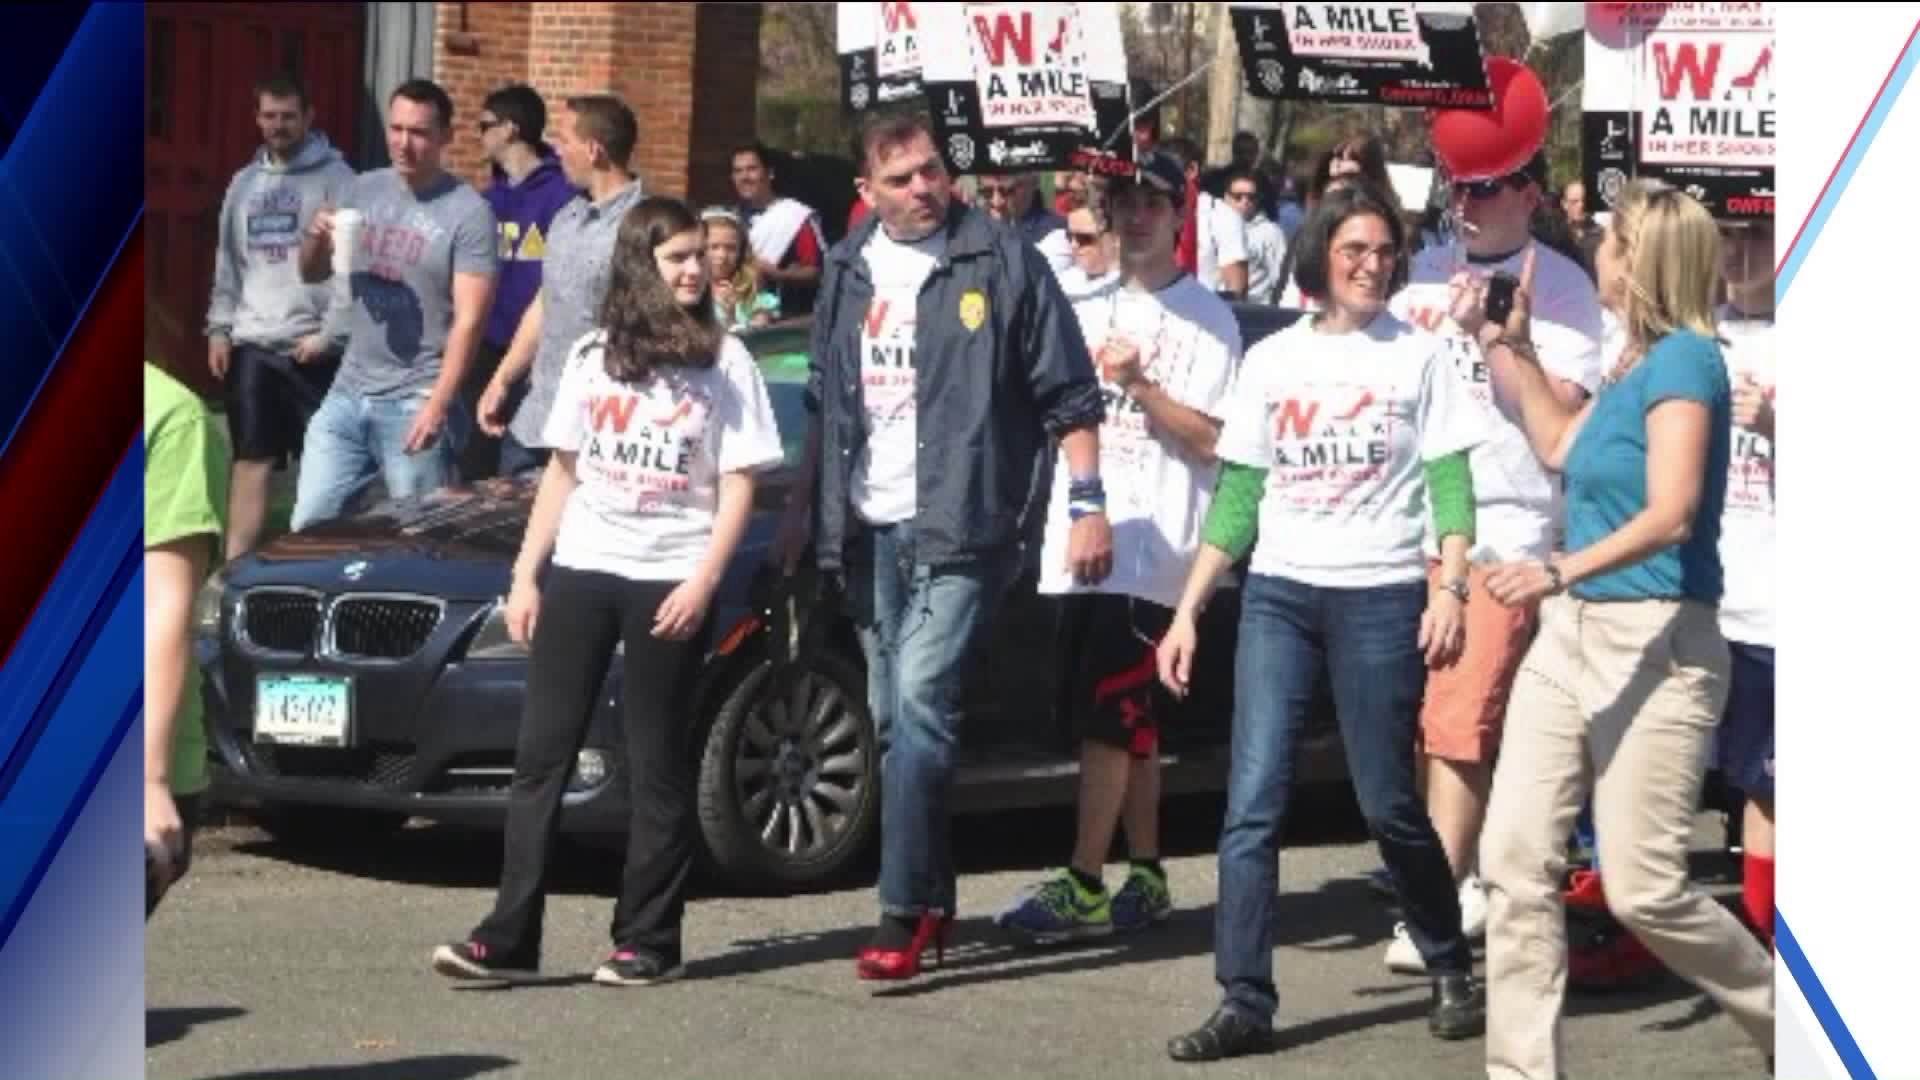 Chat with the Chief - Walk a Mile in Her Shoes